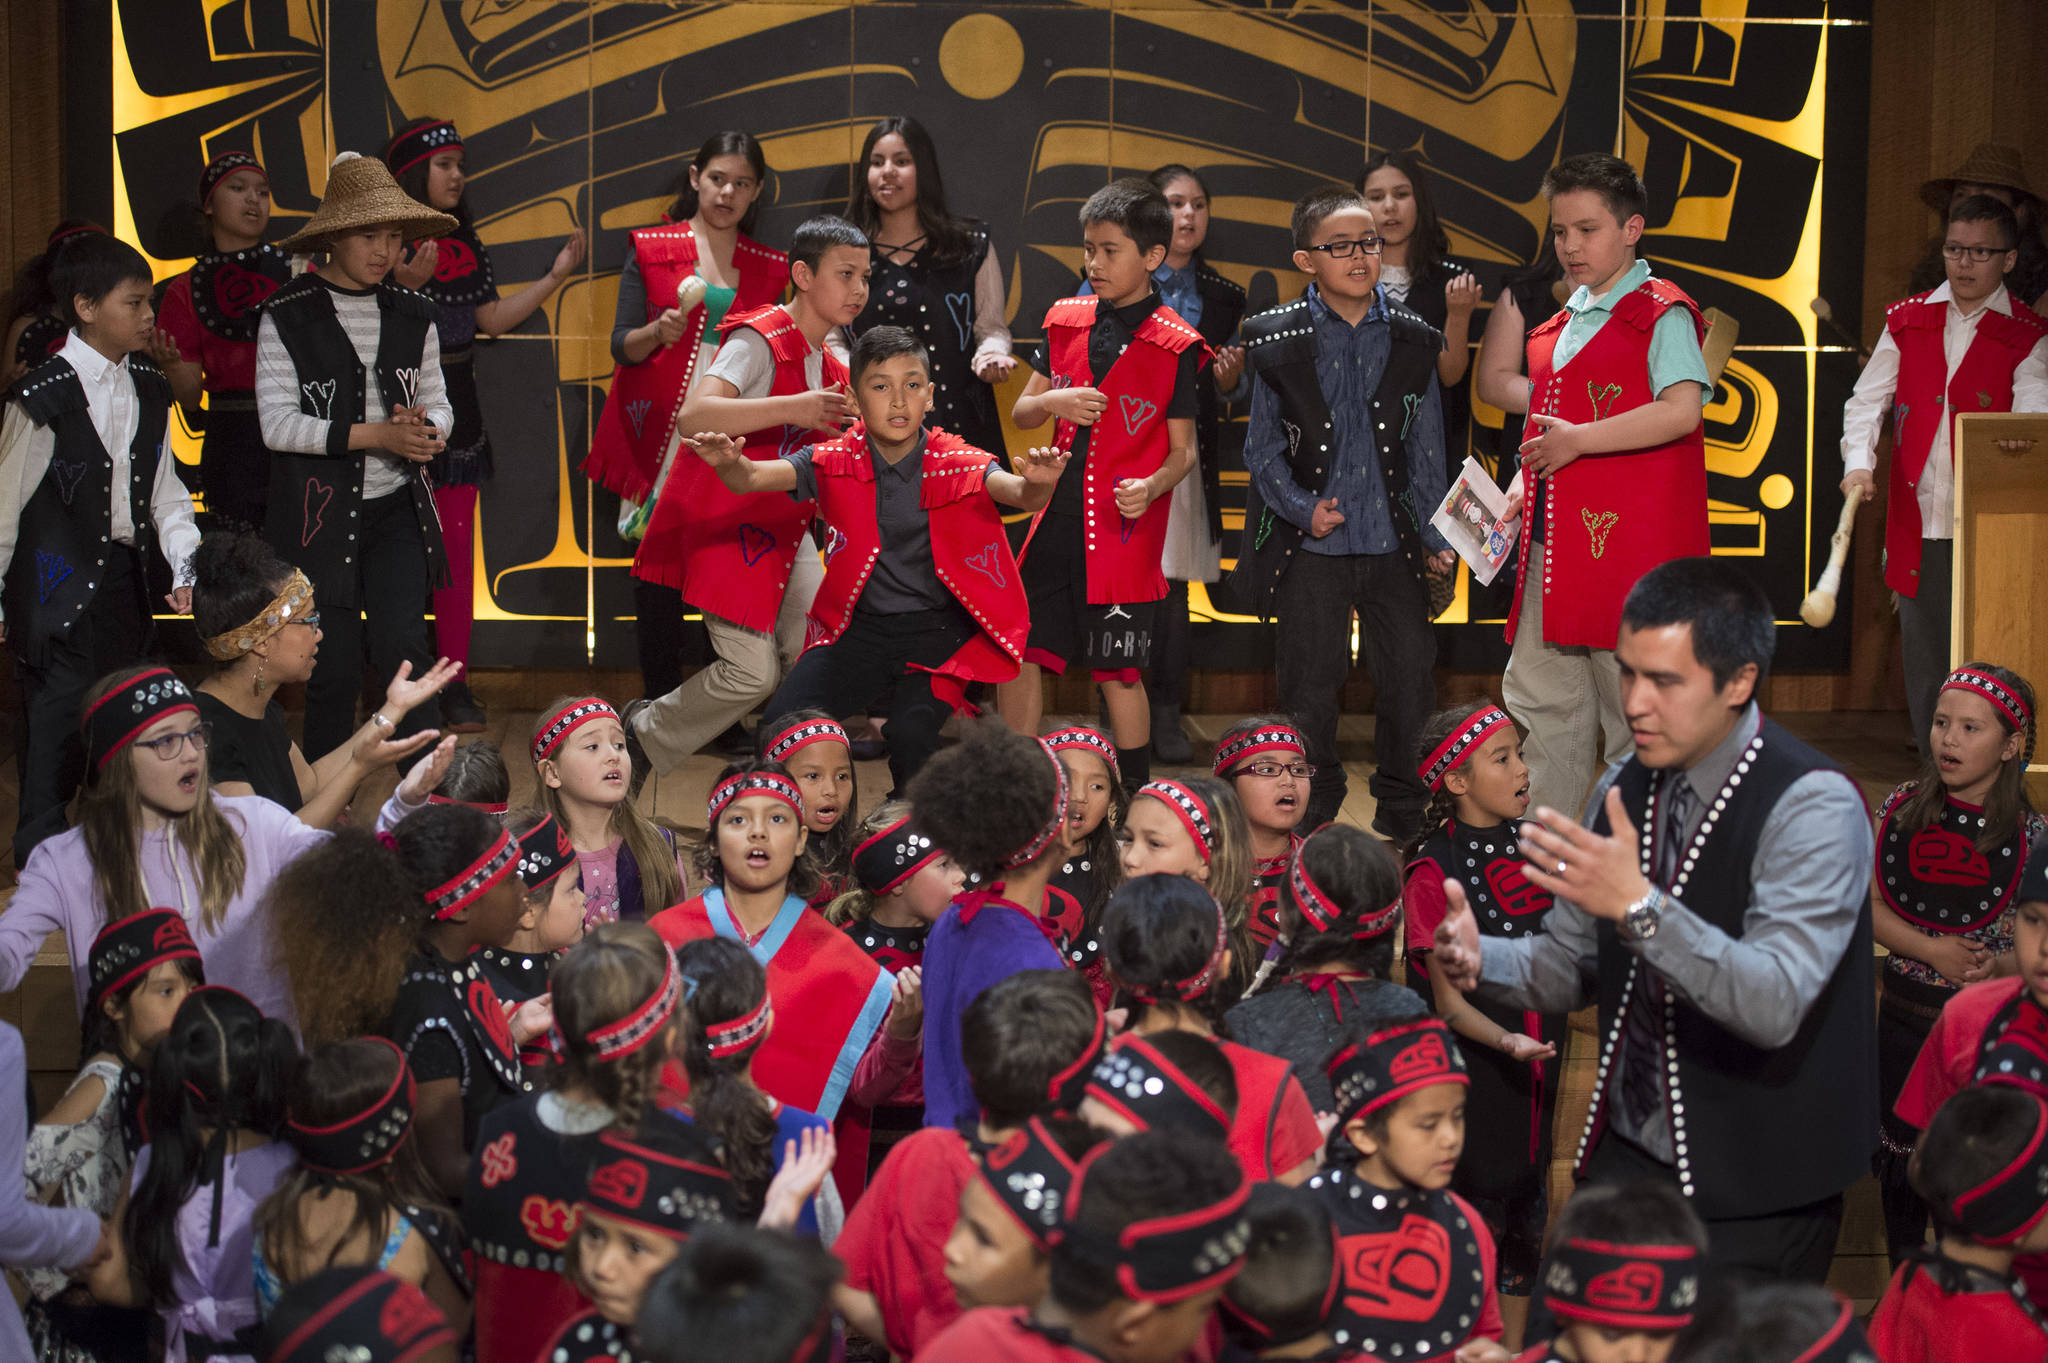 Students with the Tlingit Culture Language & Literacy program at Harborview Elementary School dance during the 5th Grade Promotion ceremony held in the clan house at the Walter Soboleff Center on Wednesday, May 22, 2019. (Michael Penn | Juneau Empire)